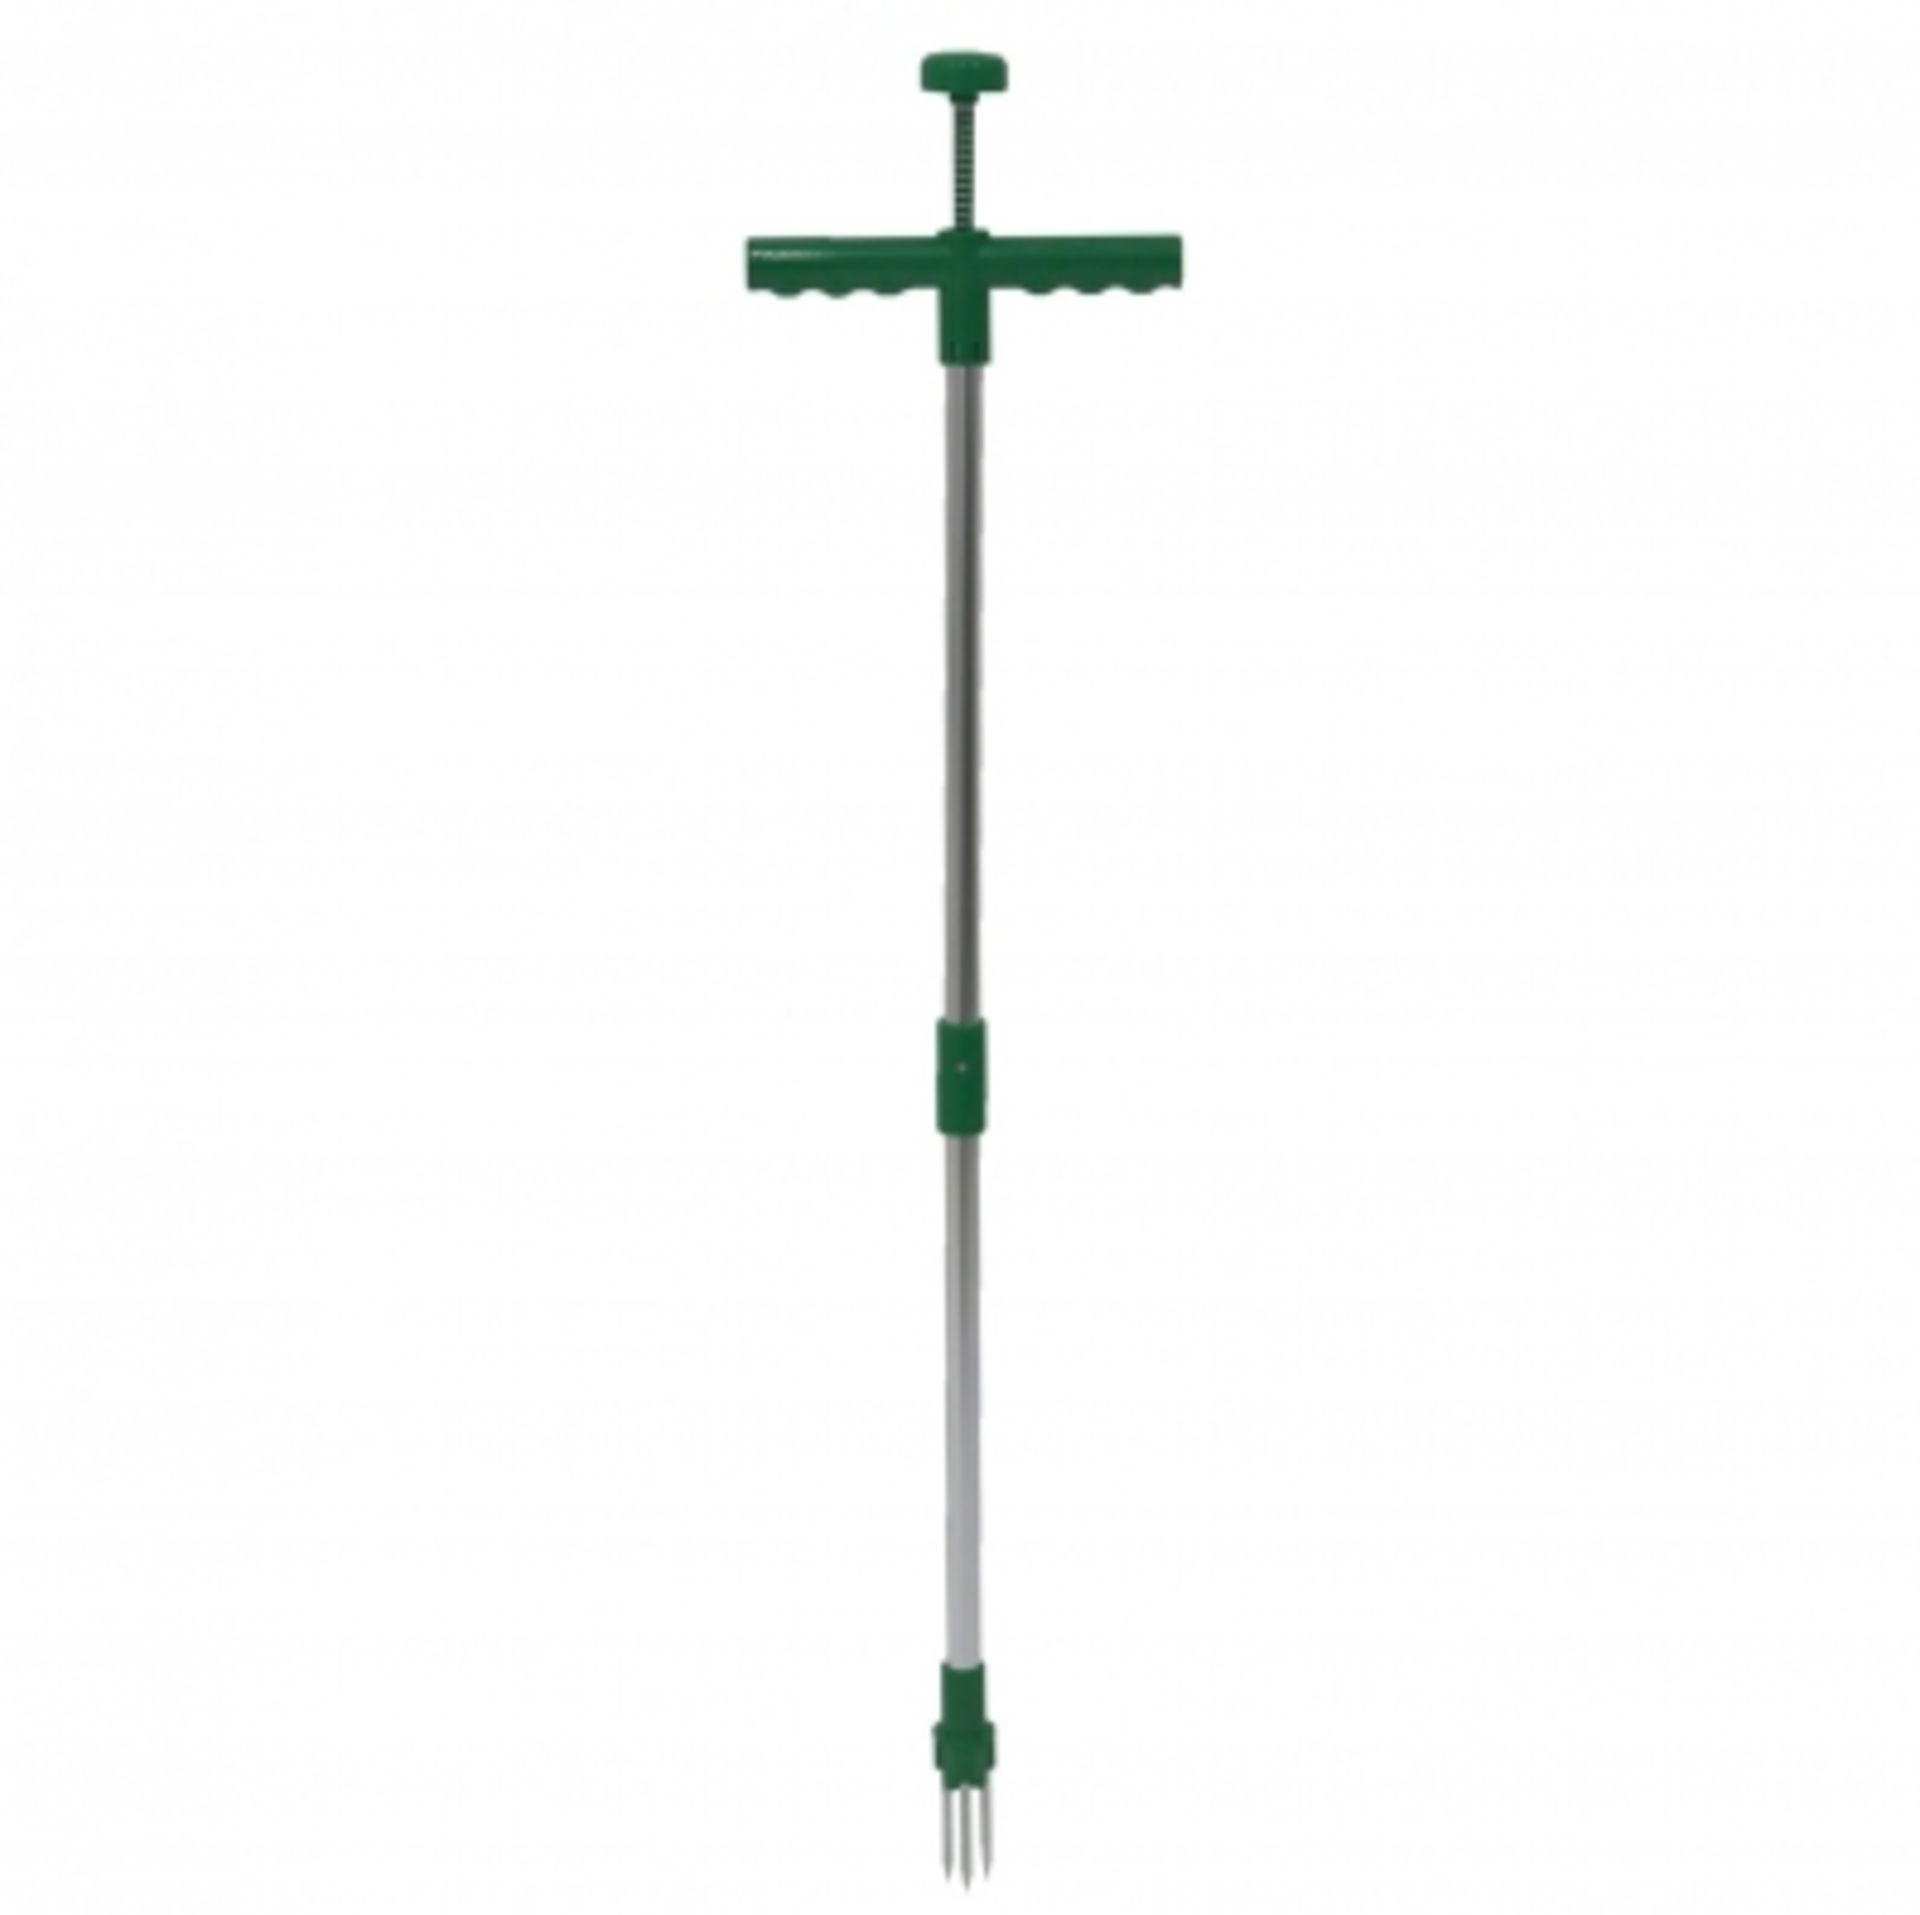 (KK148) Weed Puller Twister Remover Weeder Manual Weeding Garden Tool The weed remover is ...